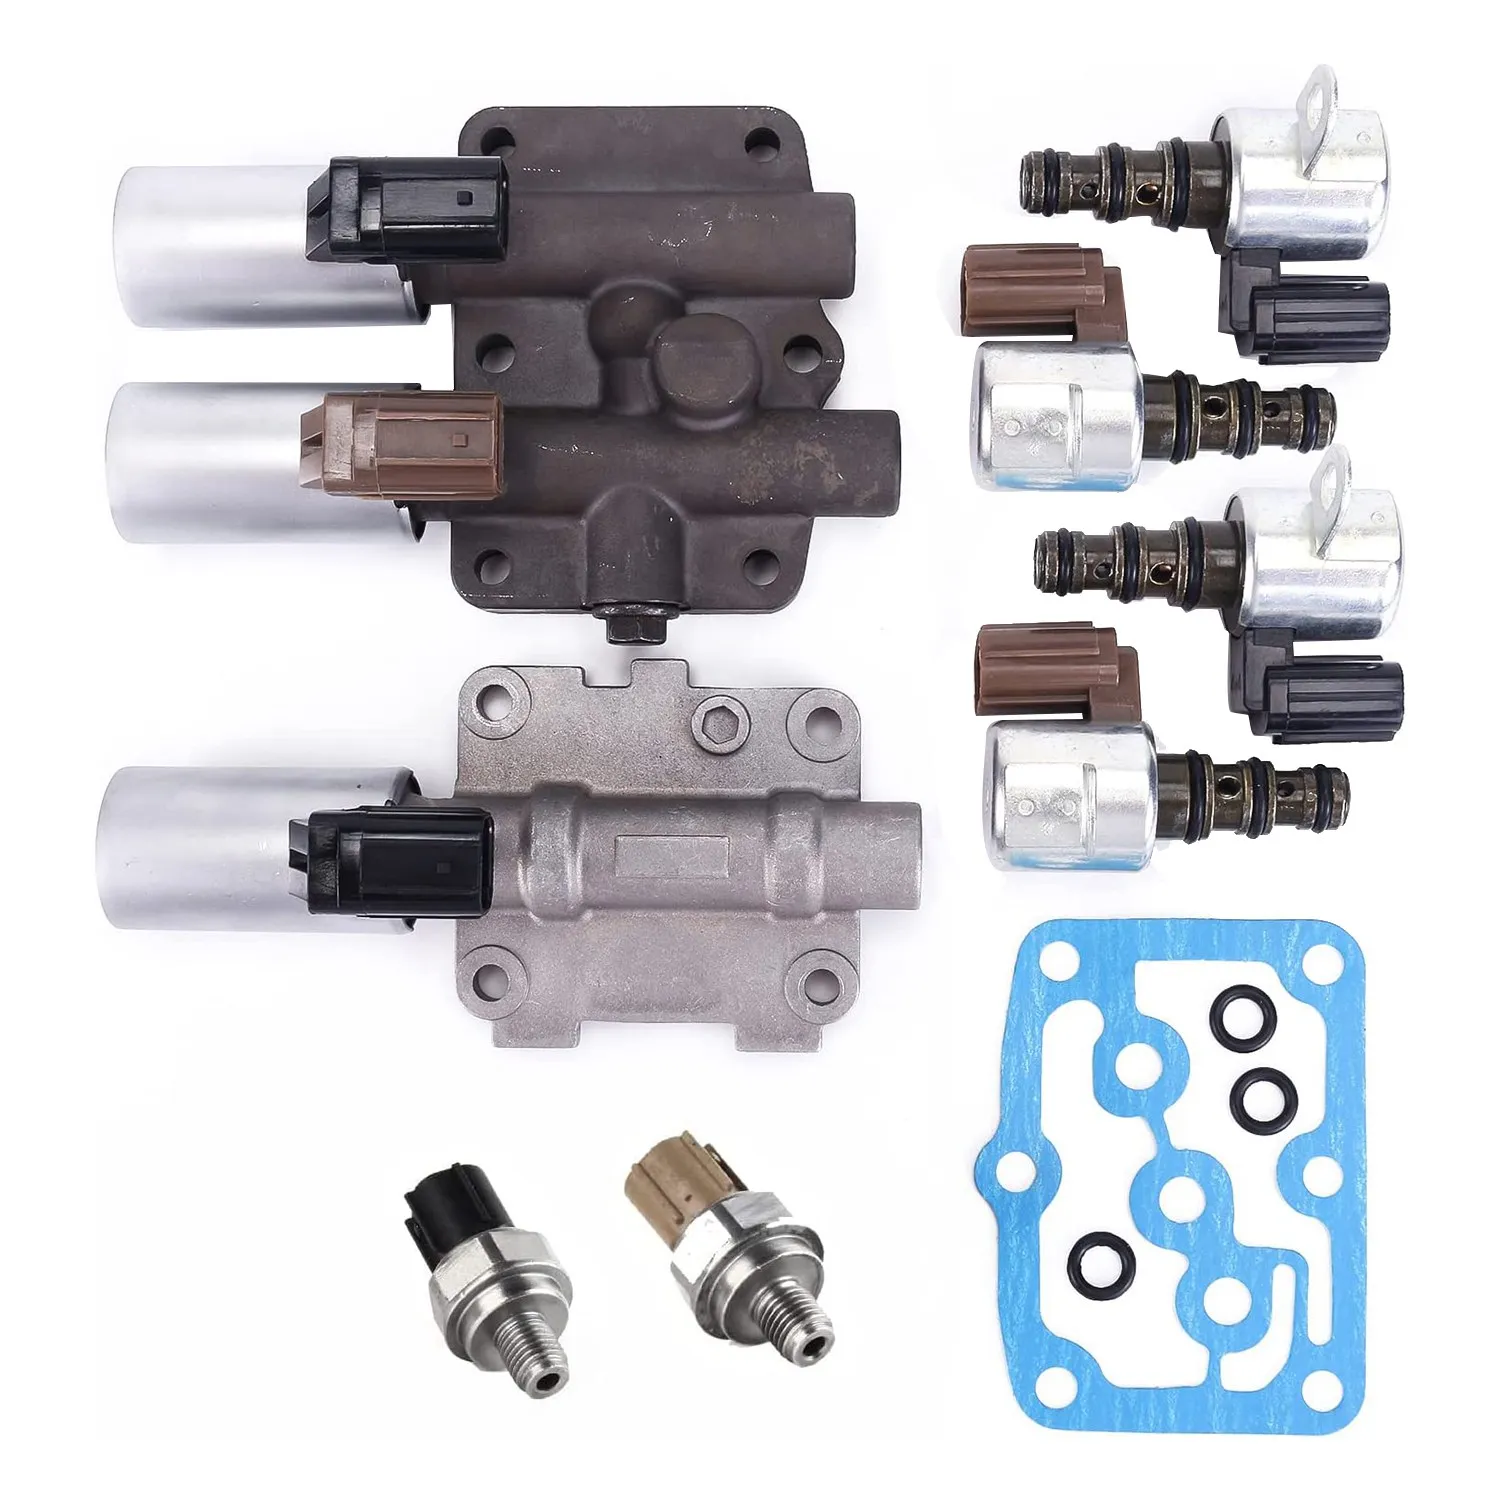 

Transmission Solenoid Kit for Accord 28250-P6H-024 28250-P7W-003 28400-P6H-013 28500-P6H-013